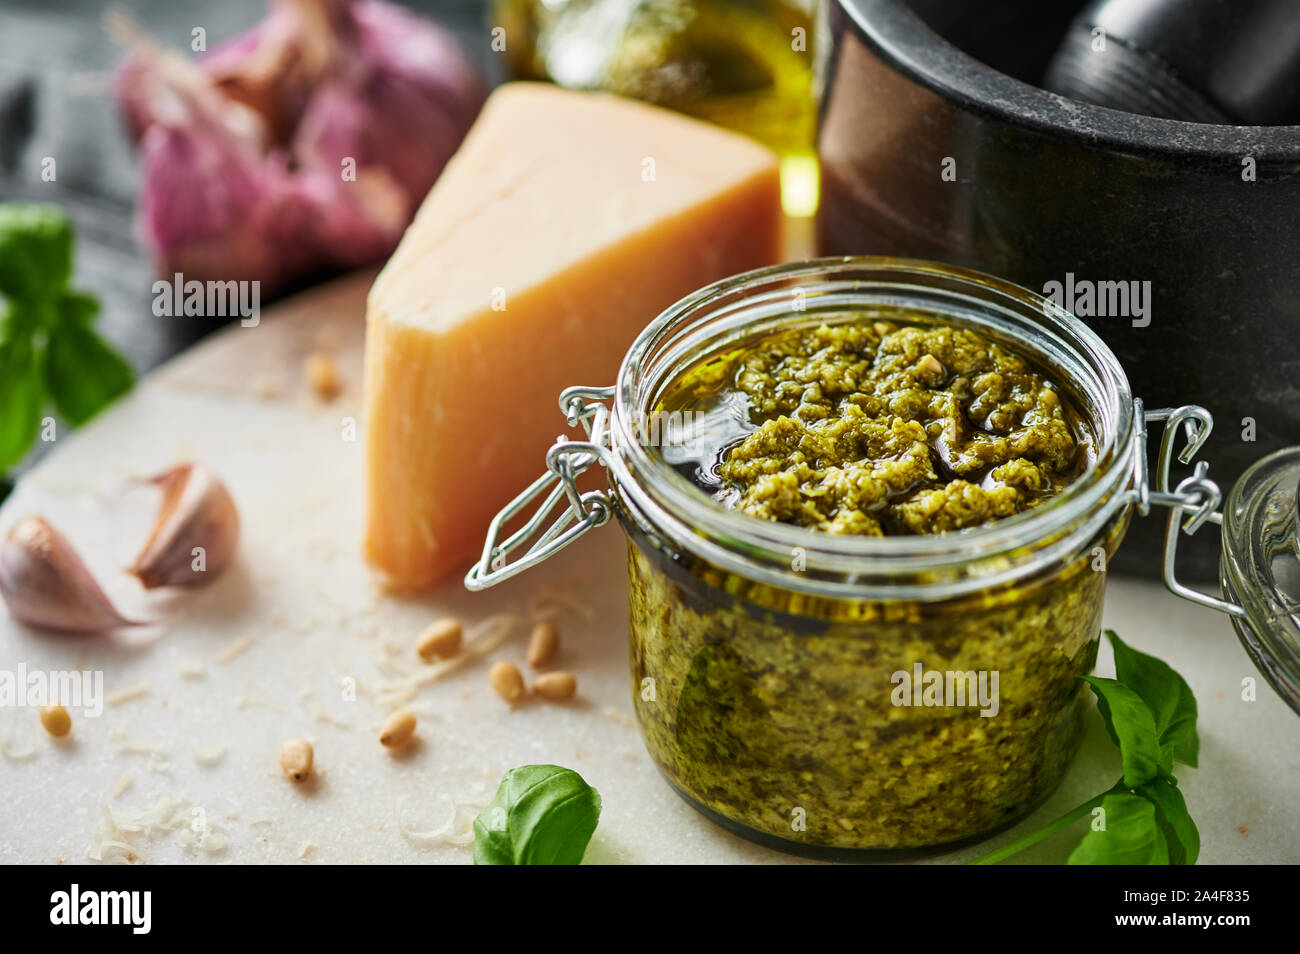 Pesto sauce or pesto genovese in a glass jar with pine nuts, parmesan, basil, oil and garlic on white marble cutting board. Copy space. Stock Photo